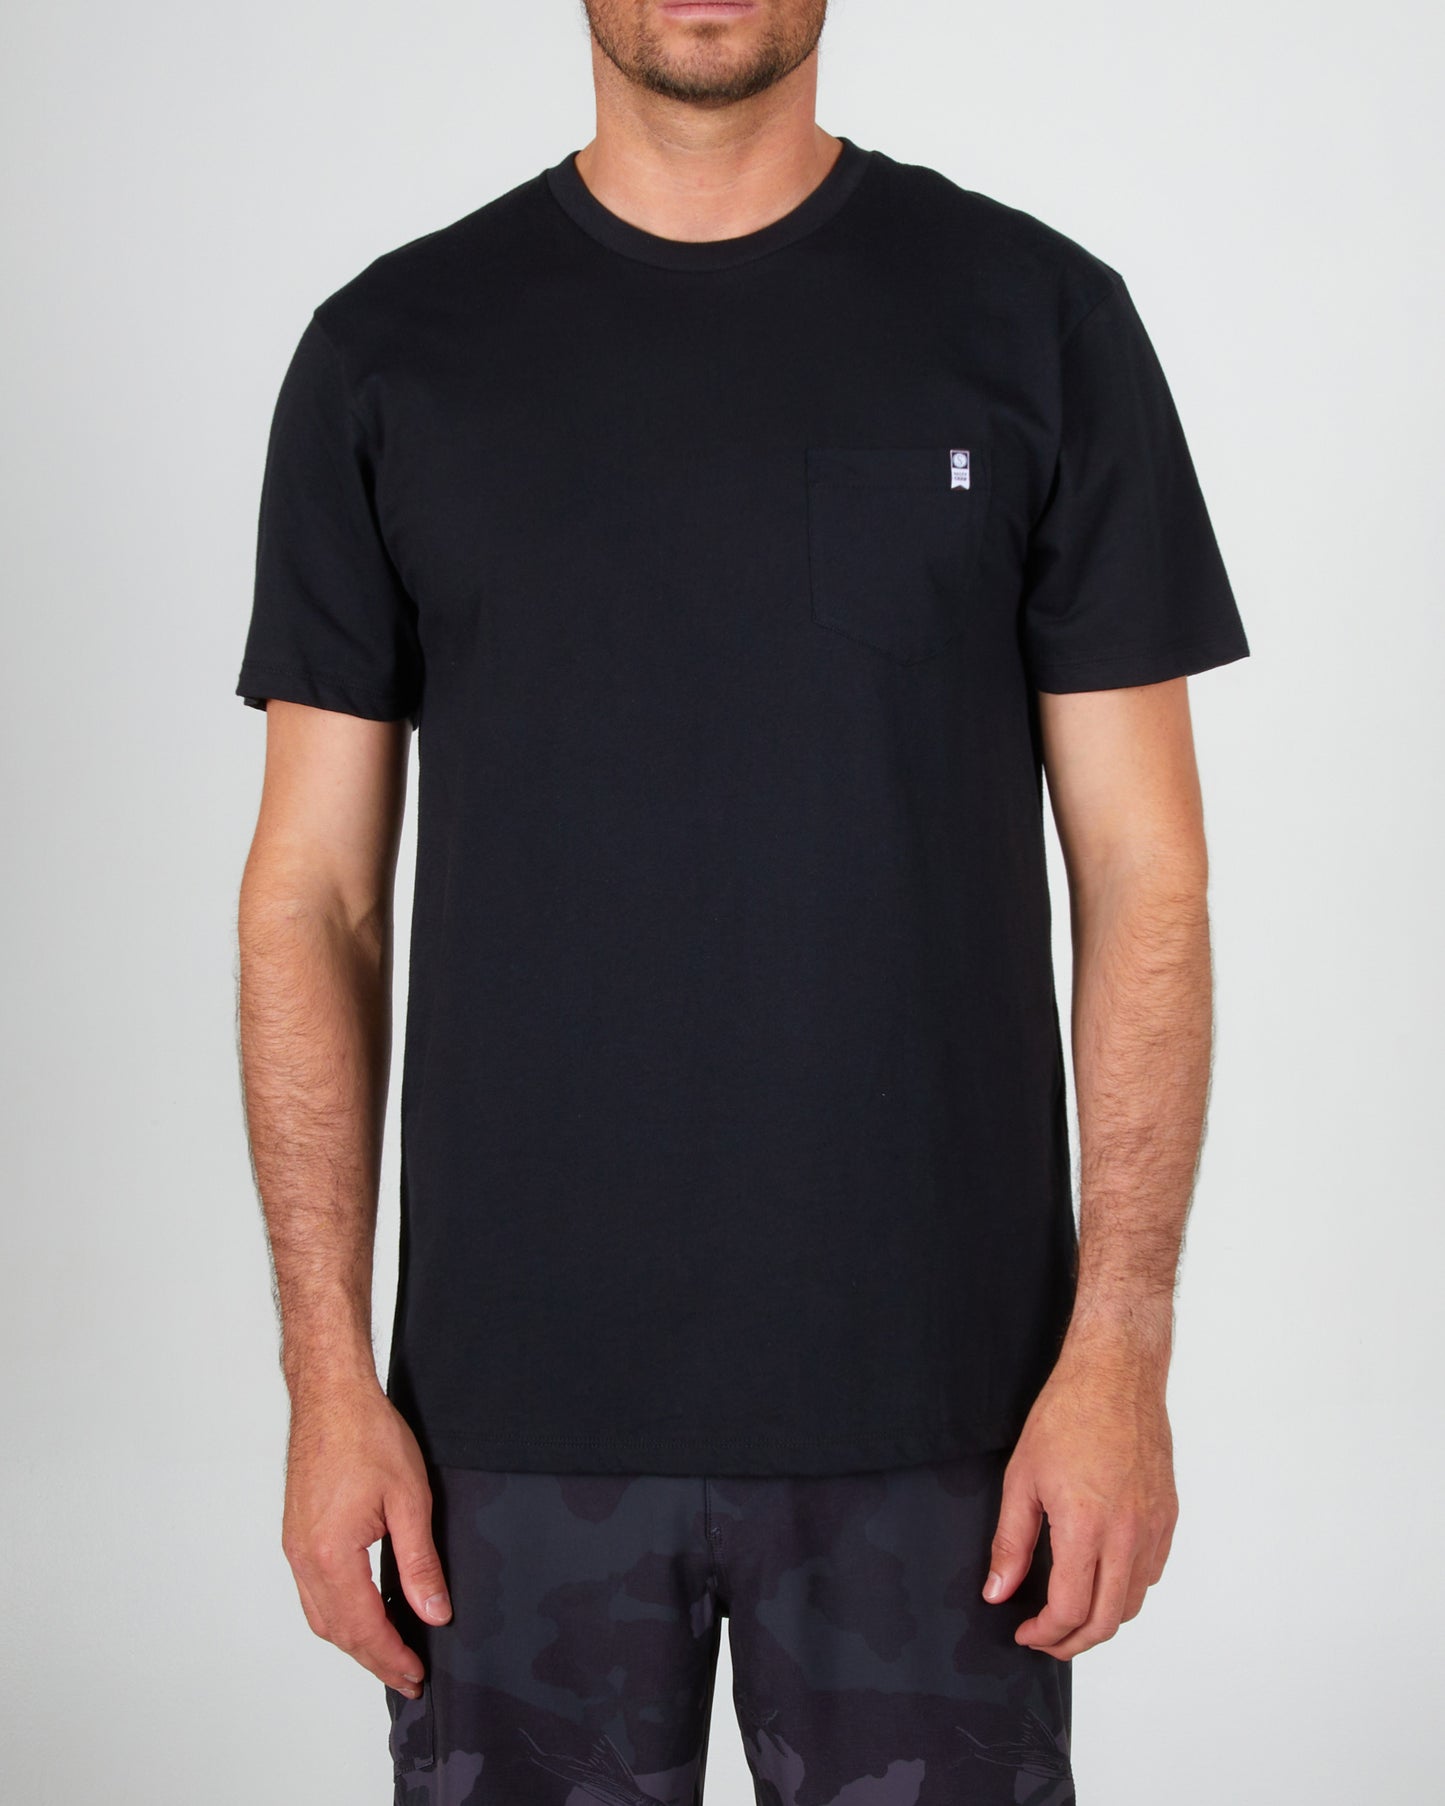 front view of Deep Pockets Black S/S Premium Pocket Tee